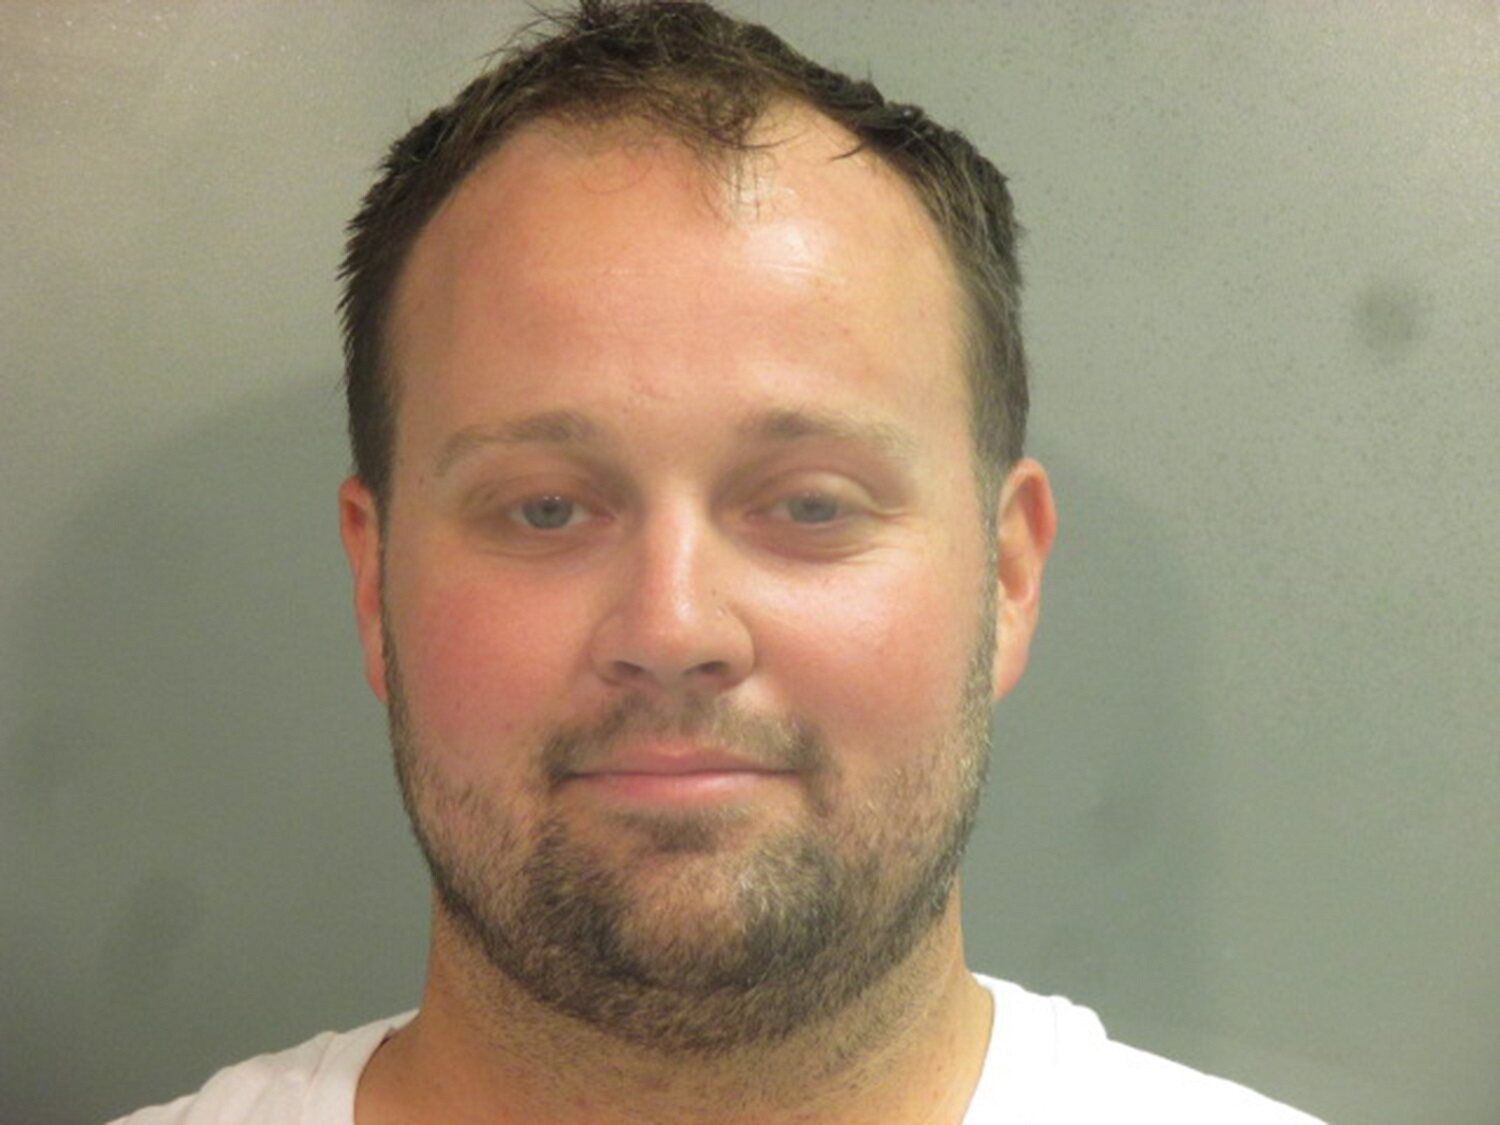 Josh Duggar poses for a mugshot after being arrested on two child pornography charges in April 2021